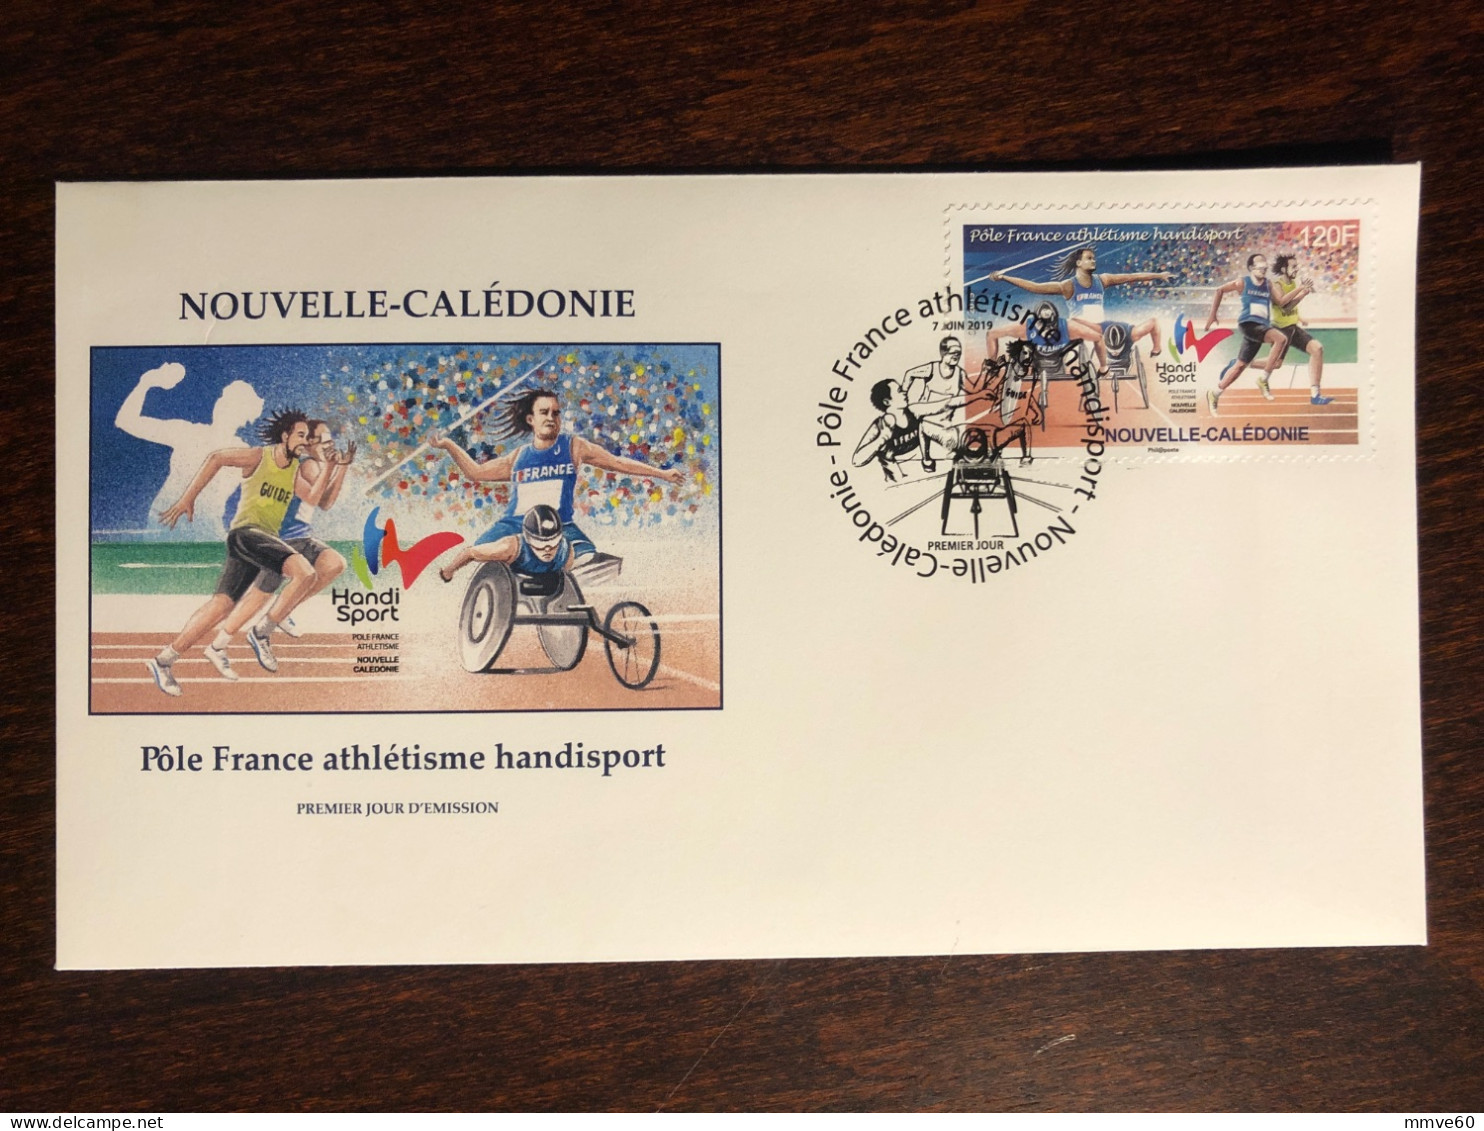 NEW CALEDONIA NOUVELLE CALEDONIE FDC COVER 2019 YEAR DISABLED IN SPORT PARALYMPICS HEALTH MEDICINE - Briefe U. Dokumente